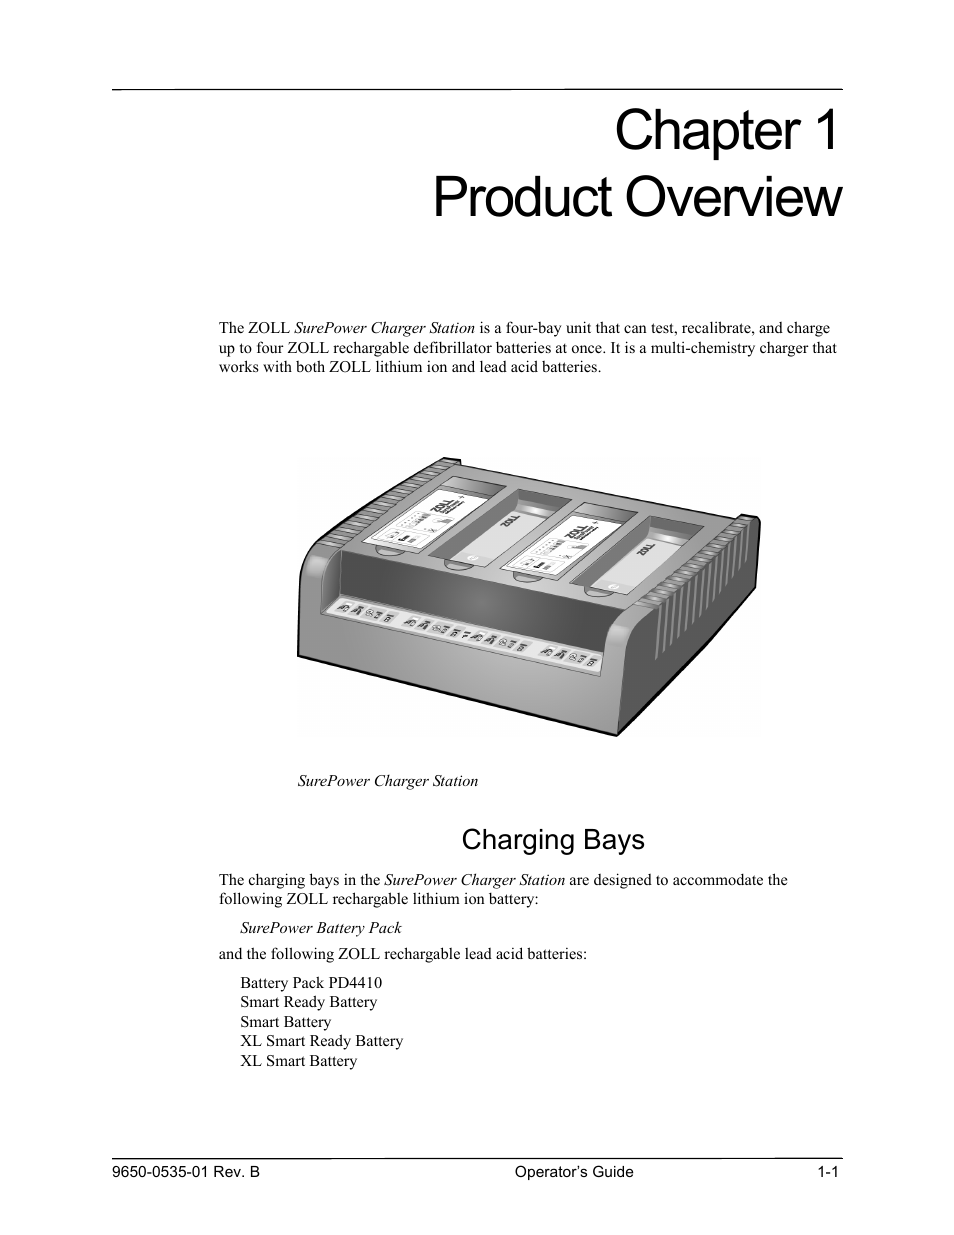 Chapter 1 product overview, Surepower charger station charging bays | ZOLL SurePower Rev B Charger Station User Manual | Page 15 / 44